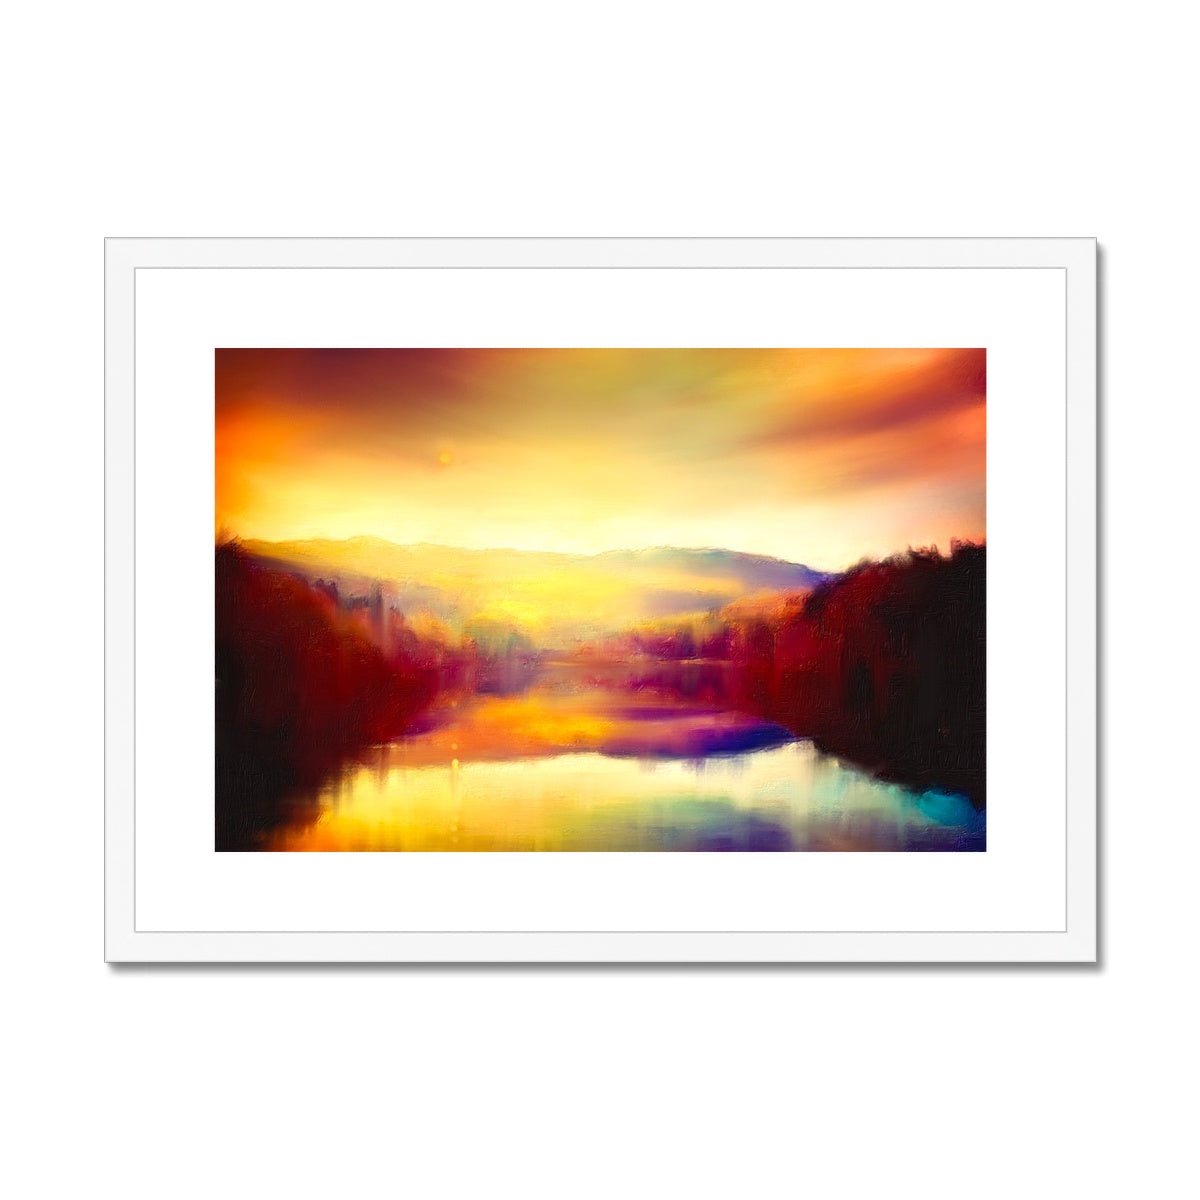 Loch Faskally Dusk Painting | Framed & Mounted Prints From Scotland-Framed & Mounted Prints-Scottish Lochs & Mountains Art Gallery-A2 Landscape-White Frame-Paintings, Prints, Homeware, Art Gifts From Scotland By Scottish Artist Kevin Hunter